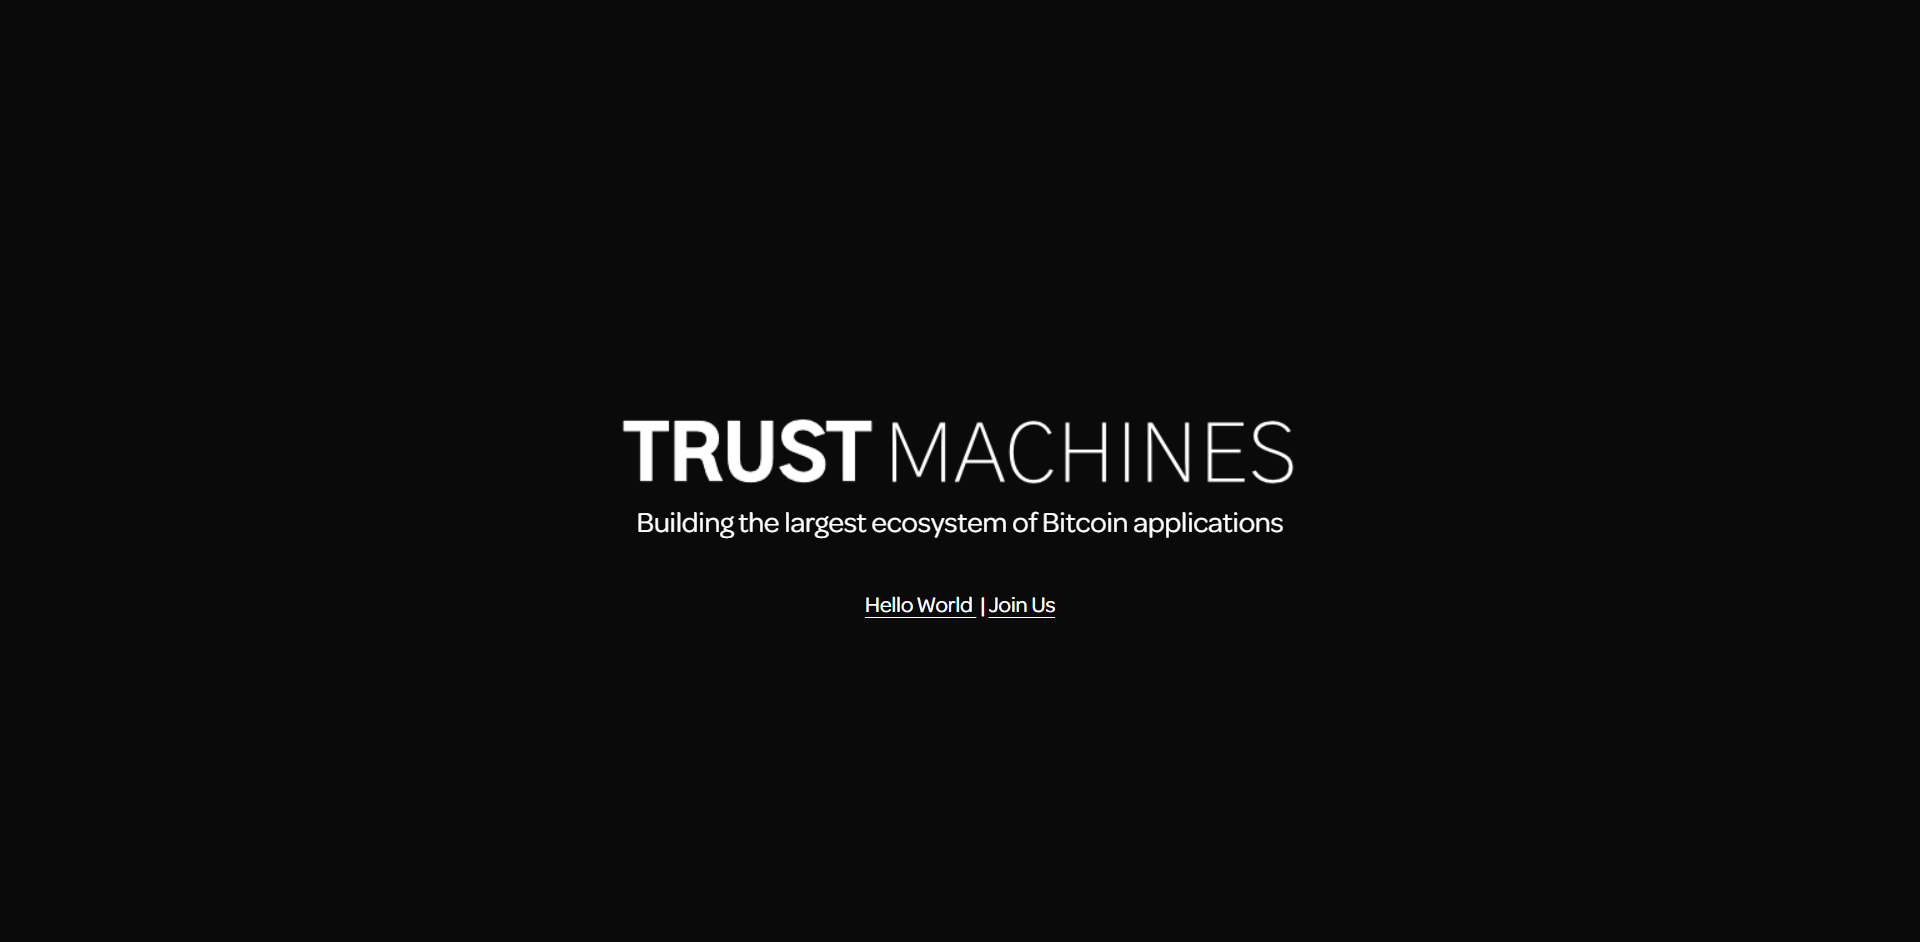 Trust MAchines joined by Coinbase, Ameritrade, a16z alum